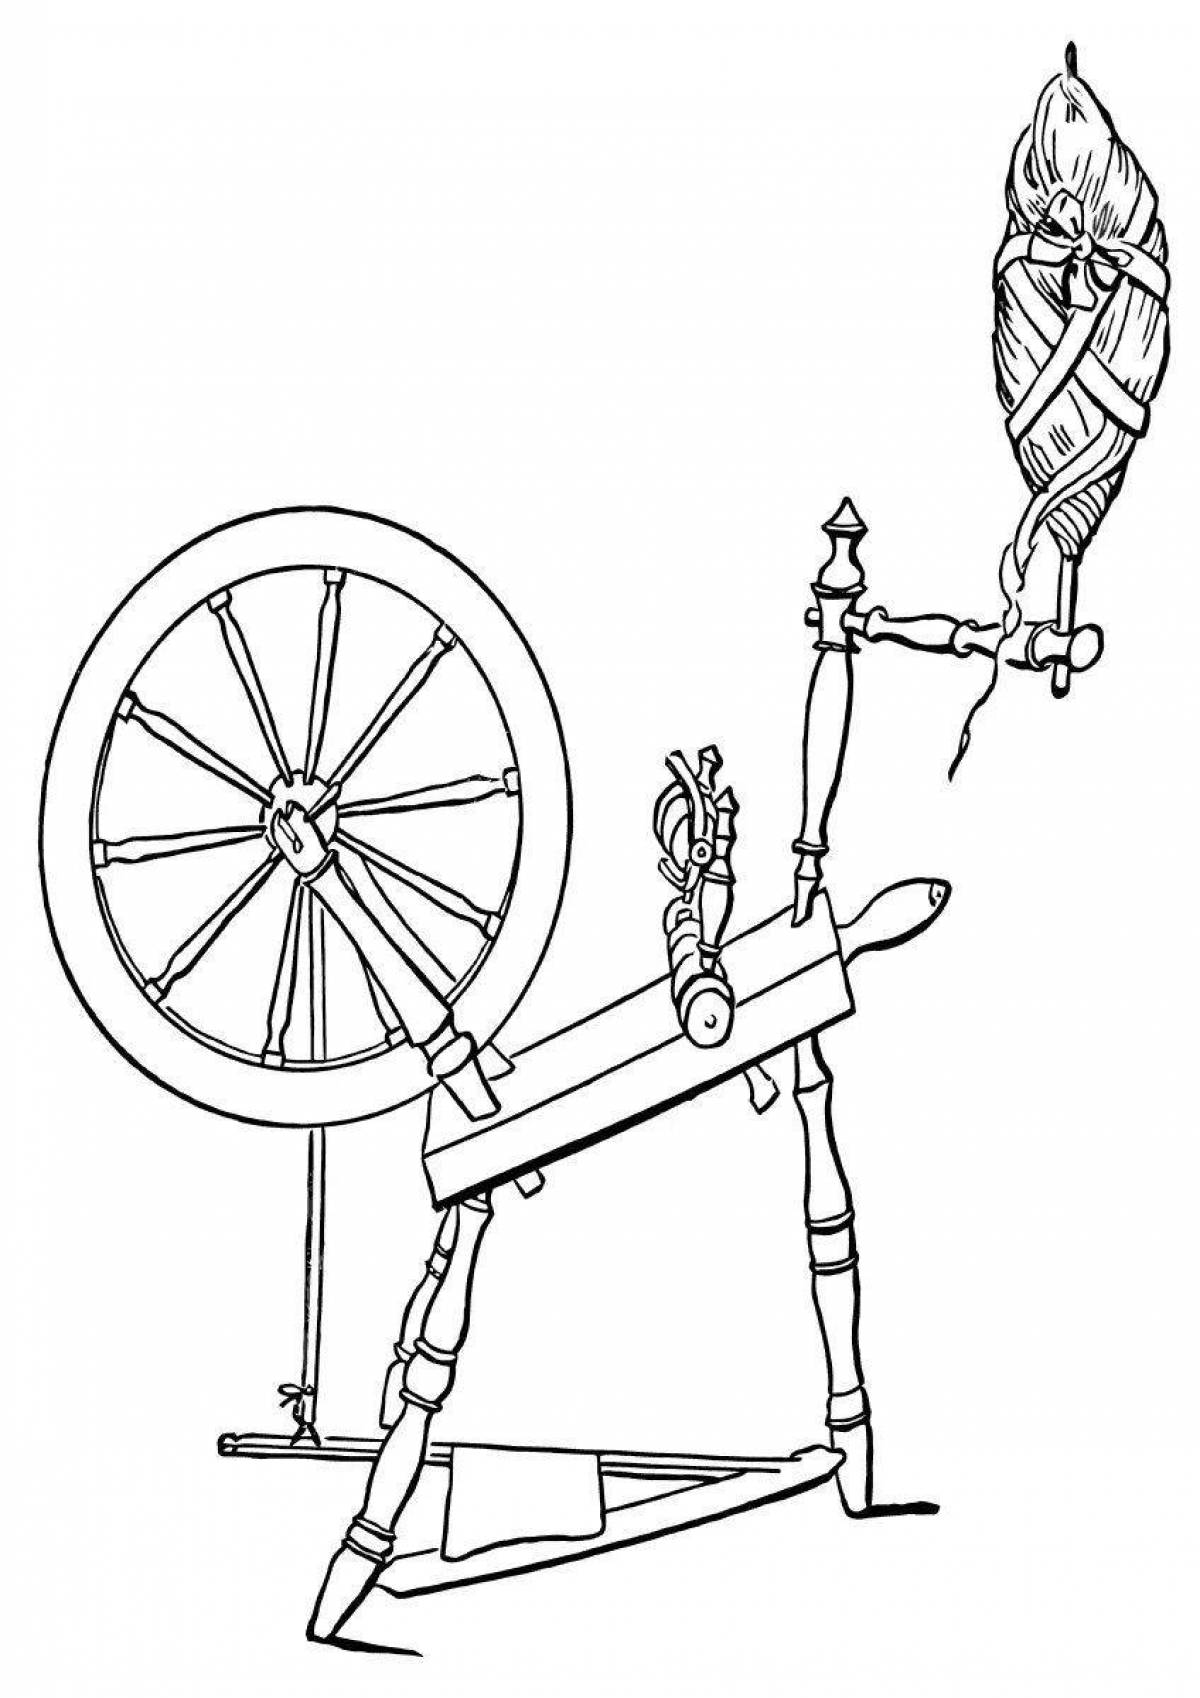 Coloring page stylish spinning wheel